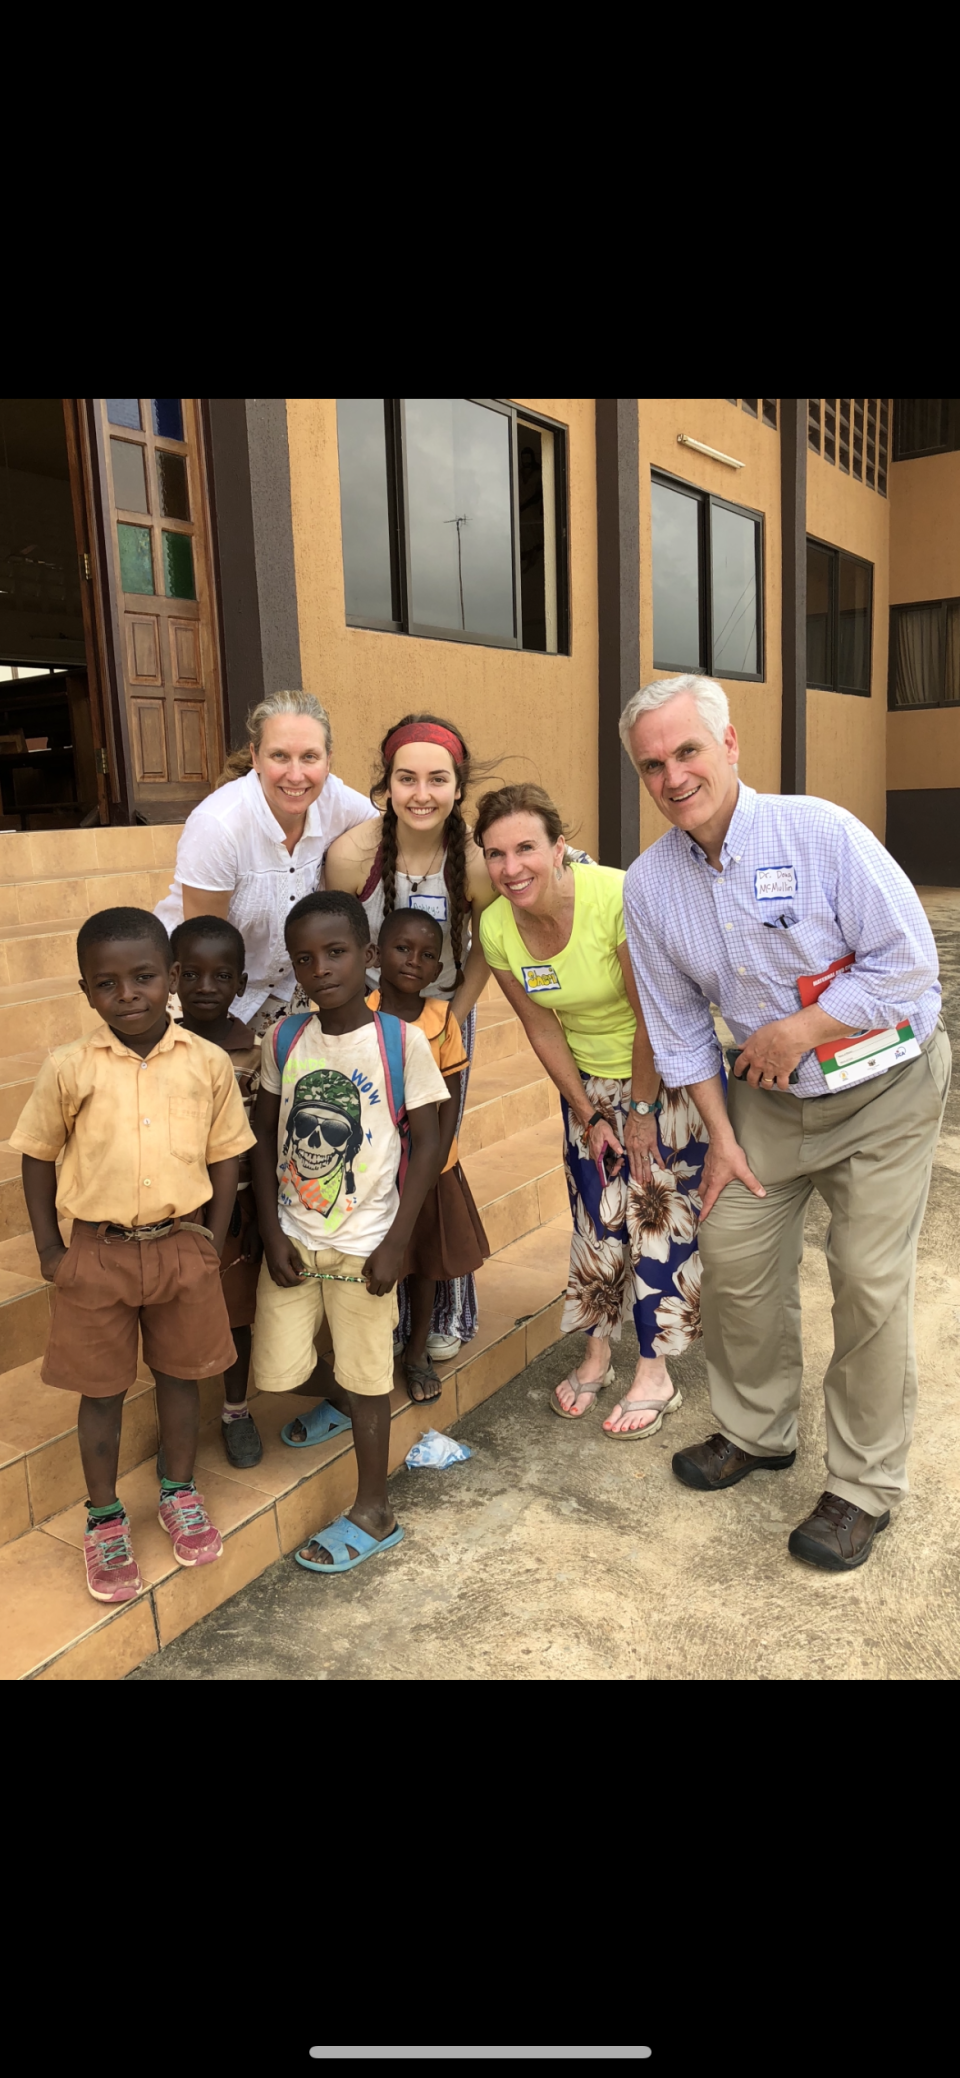 Dr. Debra Lupeika, left, with children and other medical staff during a medical mission in Ghana with Dr. McMullin